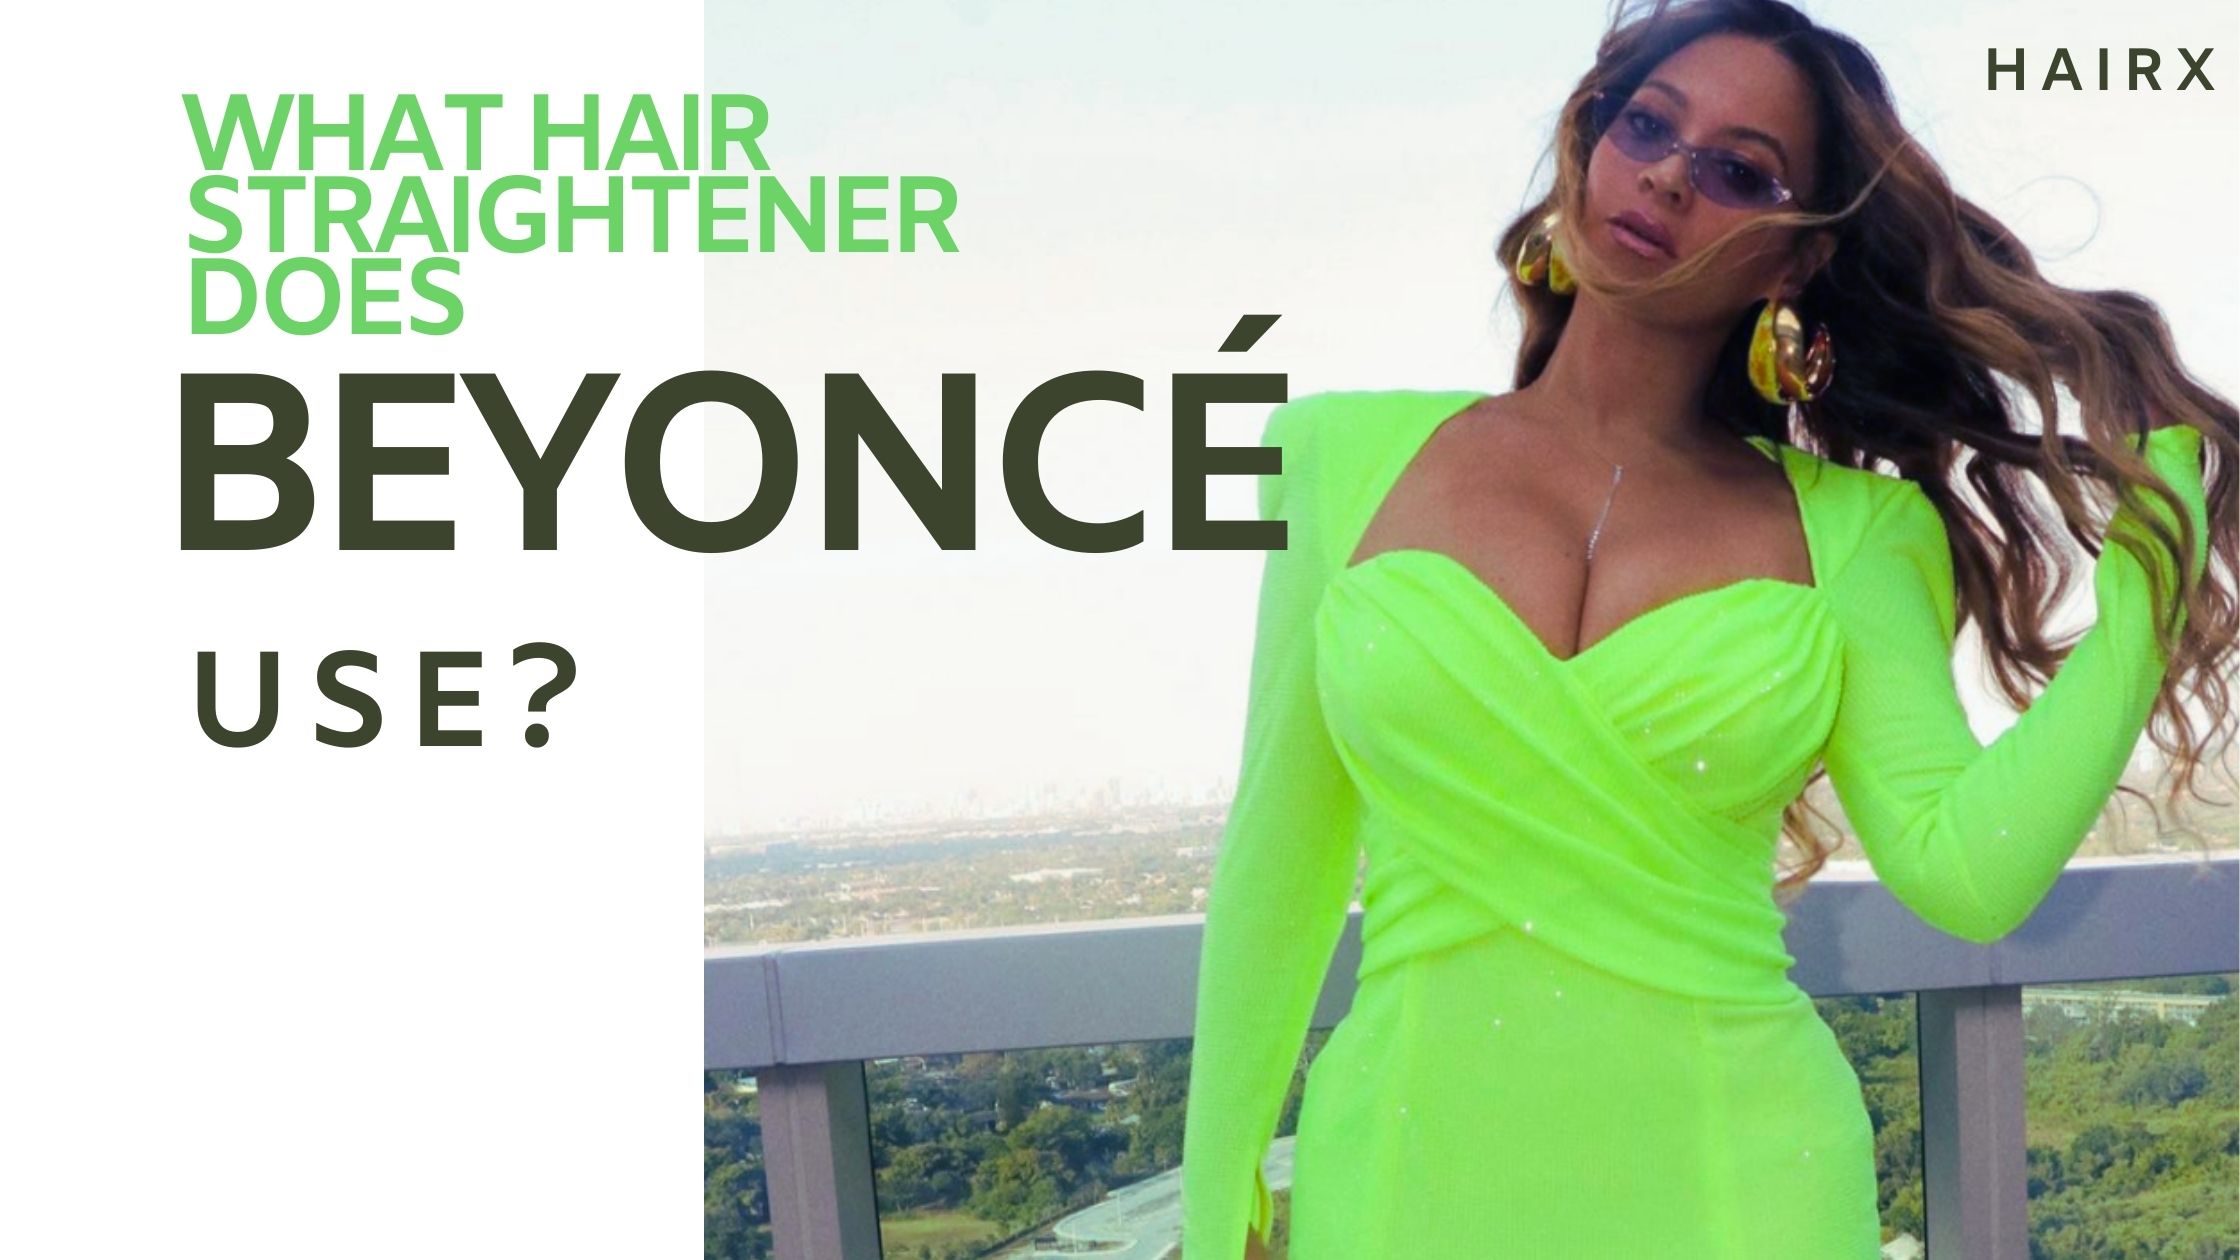 What Hair Straightener Does Beyoncé Use?